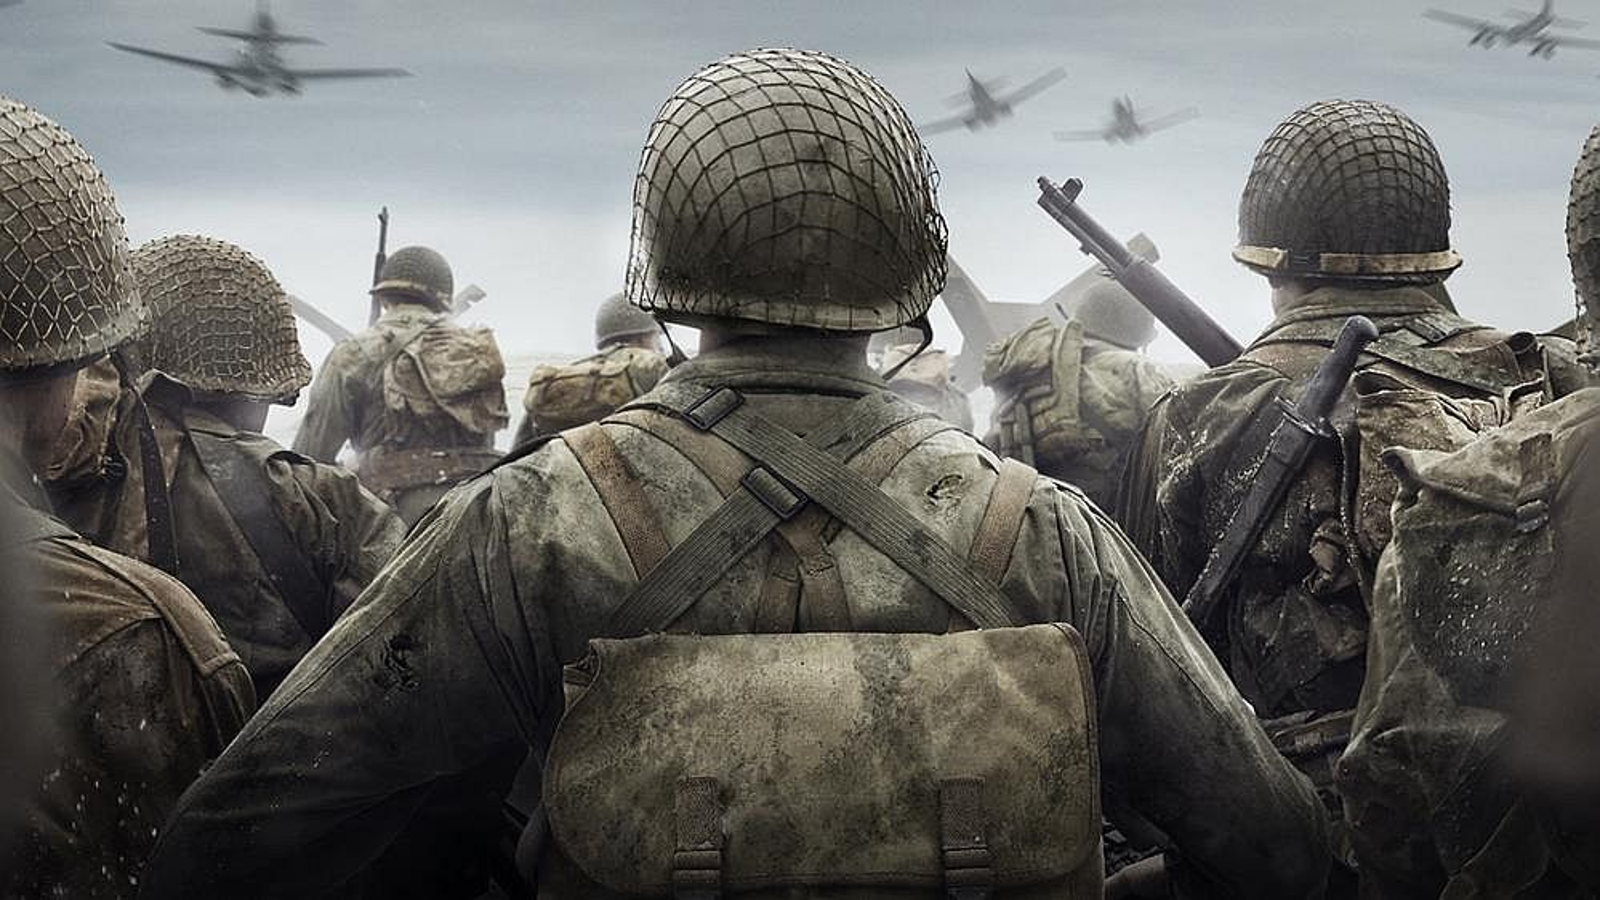 Call of Duty WW2 UK release date: Available for preorder and pre